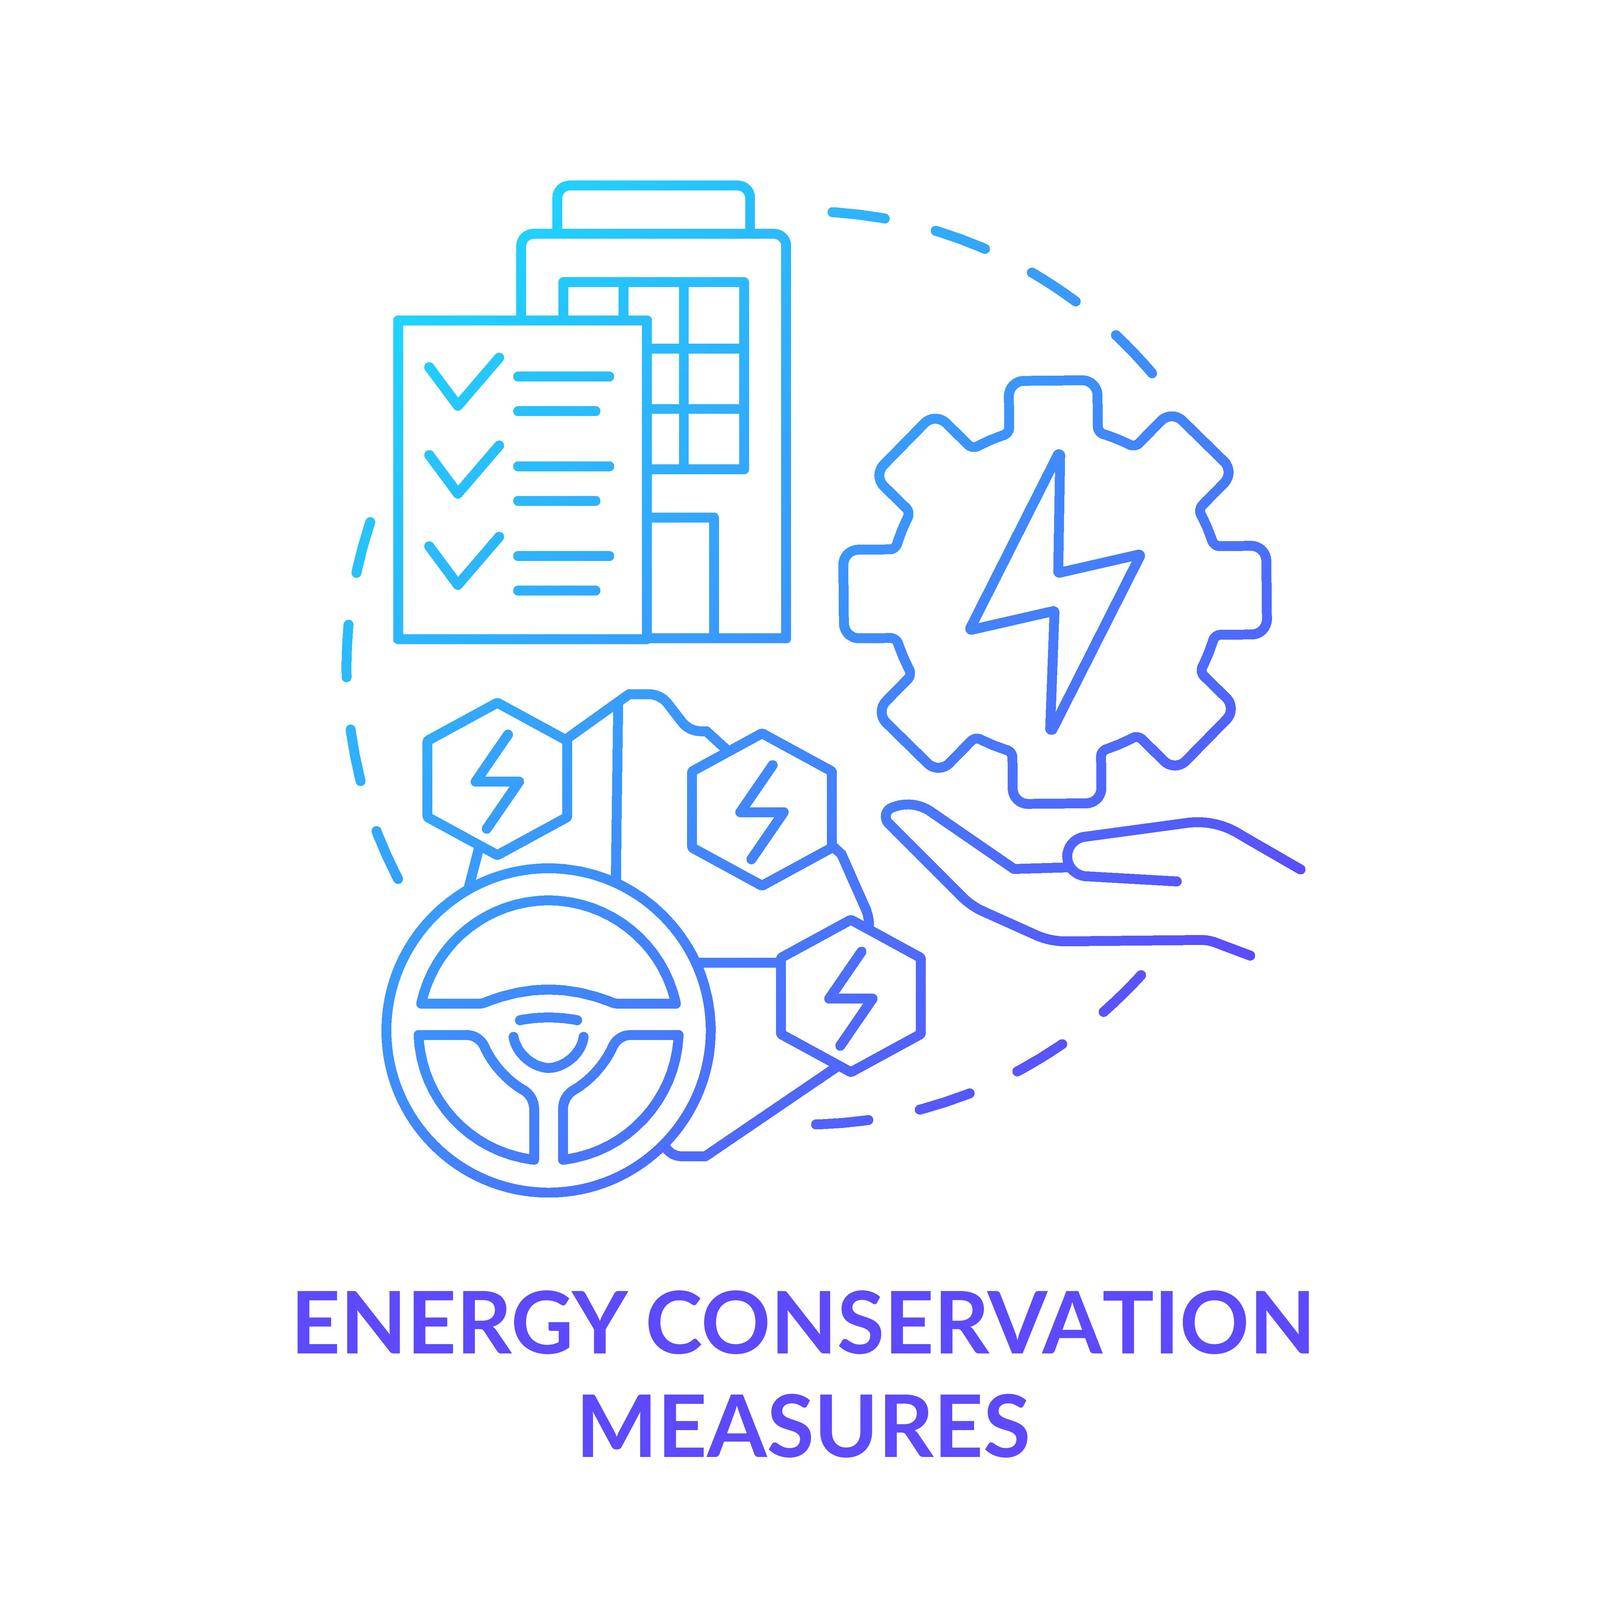 Energy conservation measures blue gradient concept icon by bsd